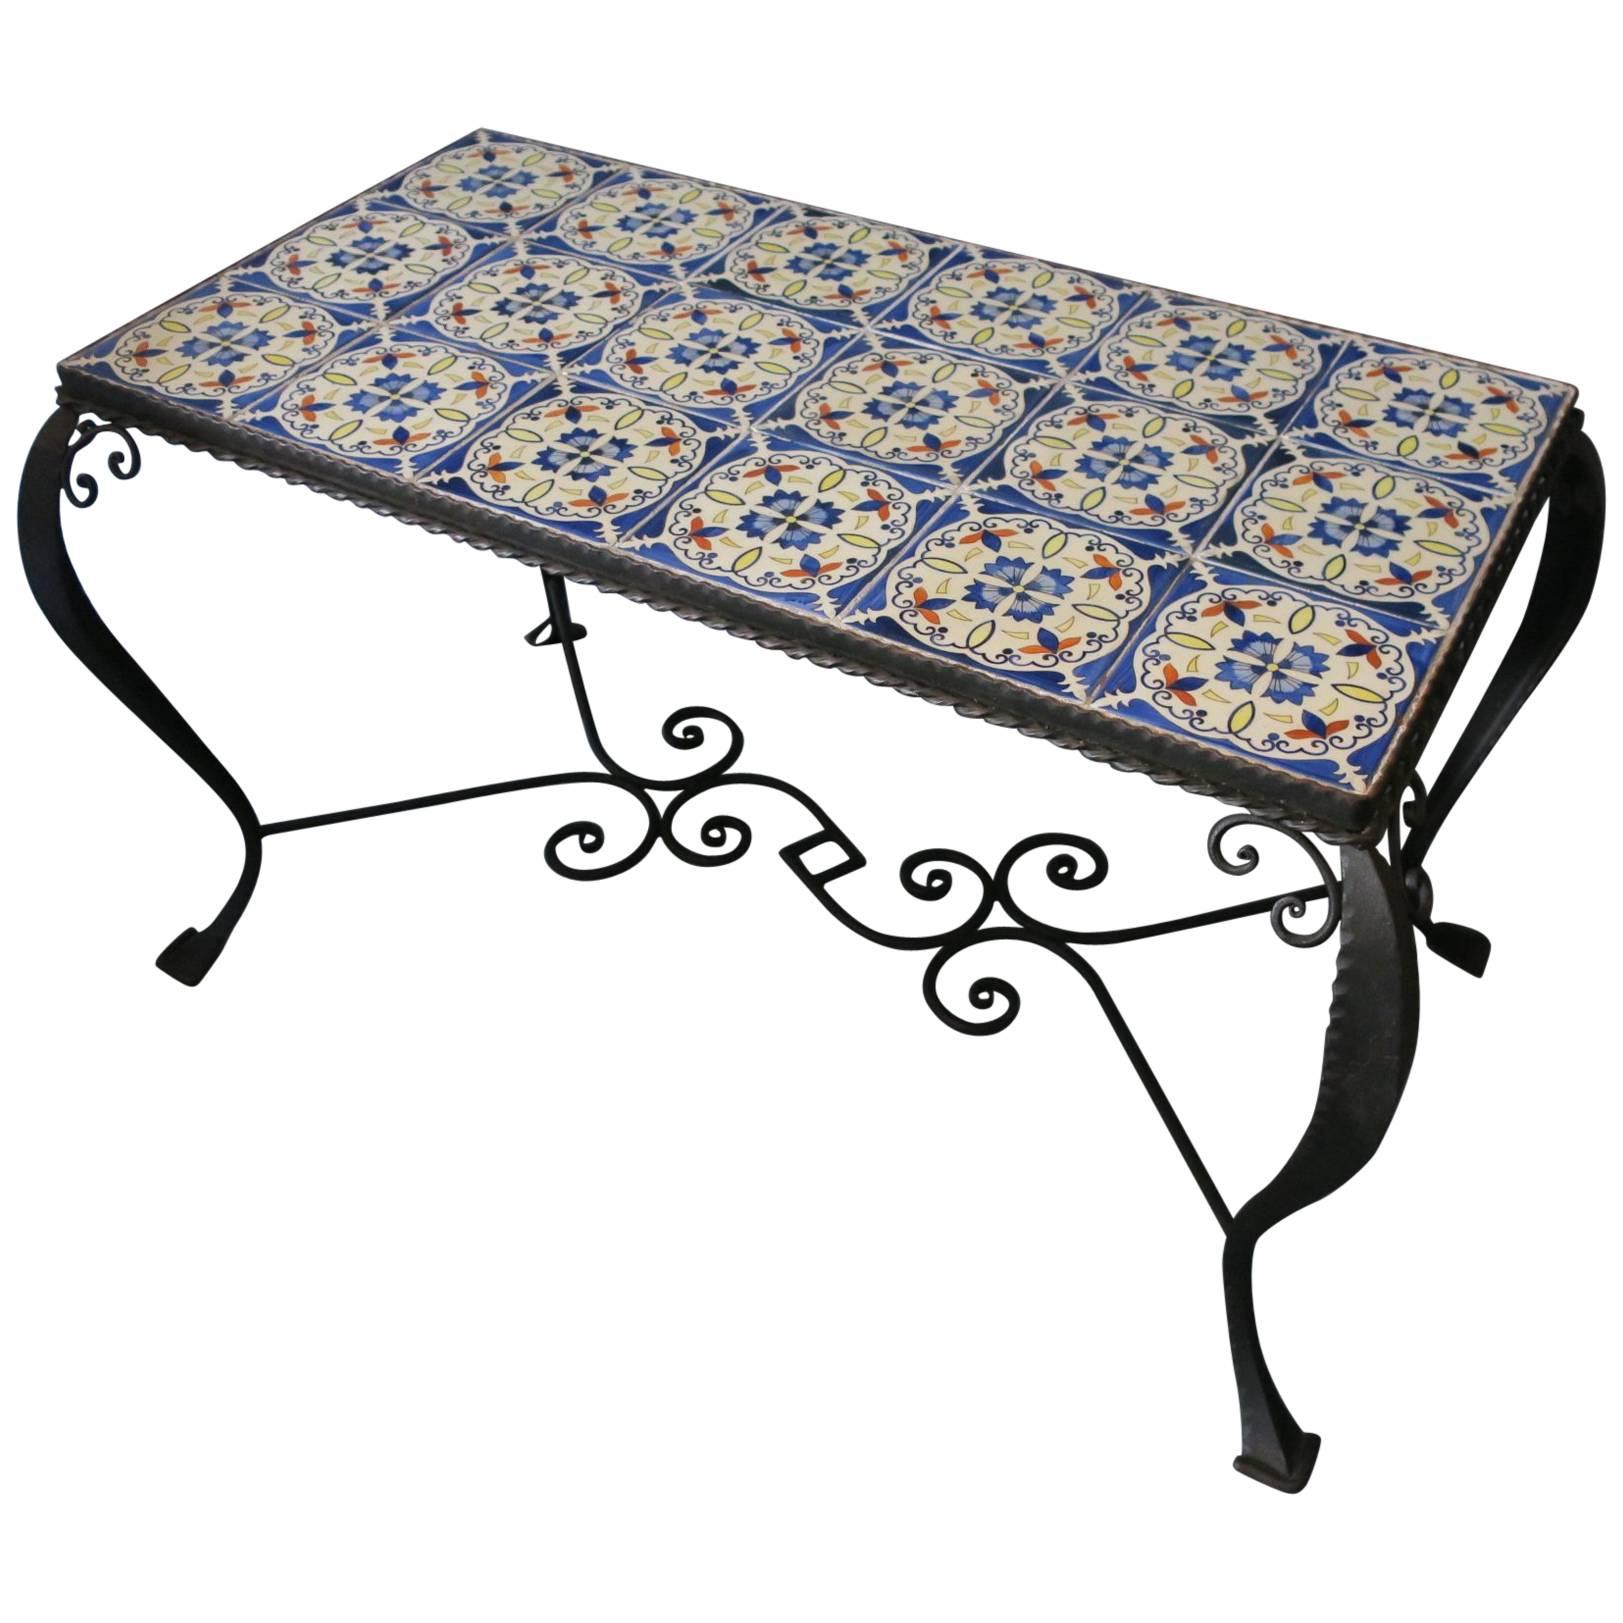 Midcentury Wrought Iron and Tiled Coffee or Cocktail Table For Sale